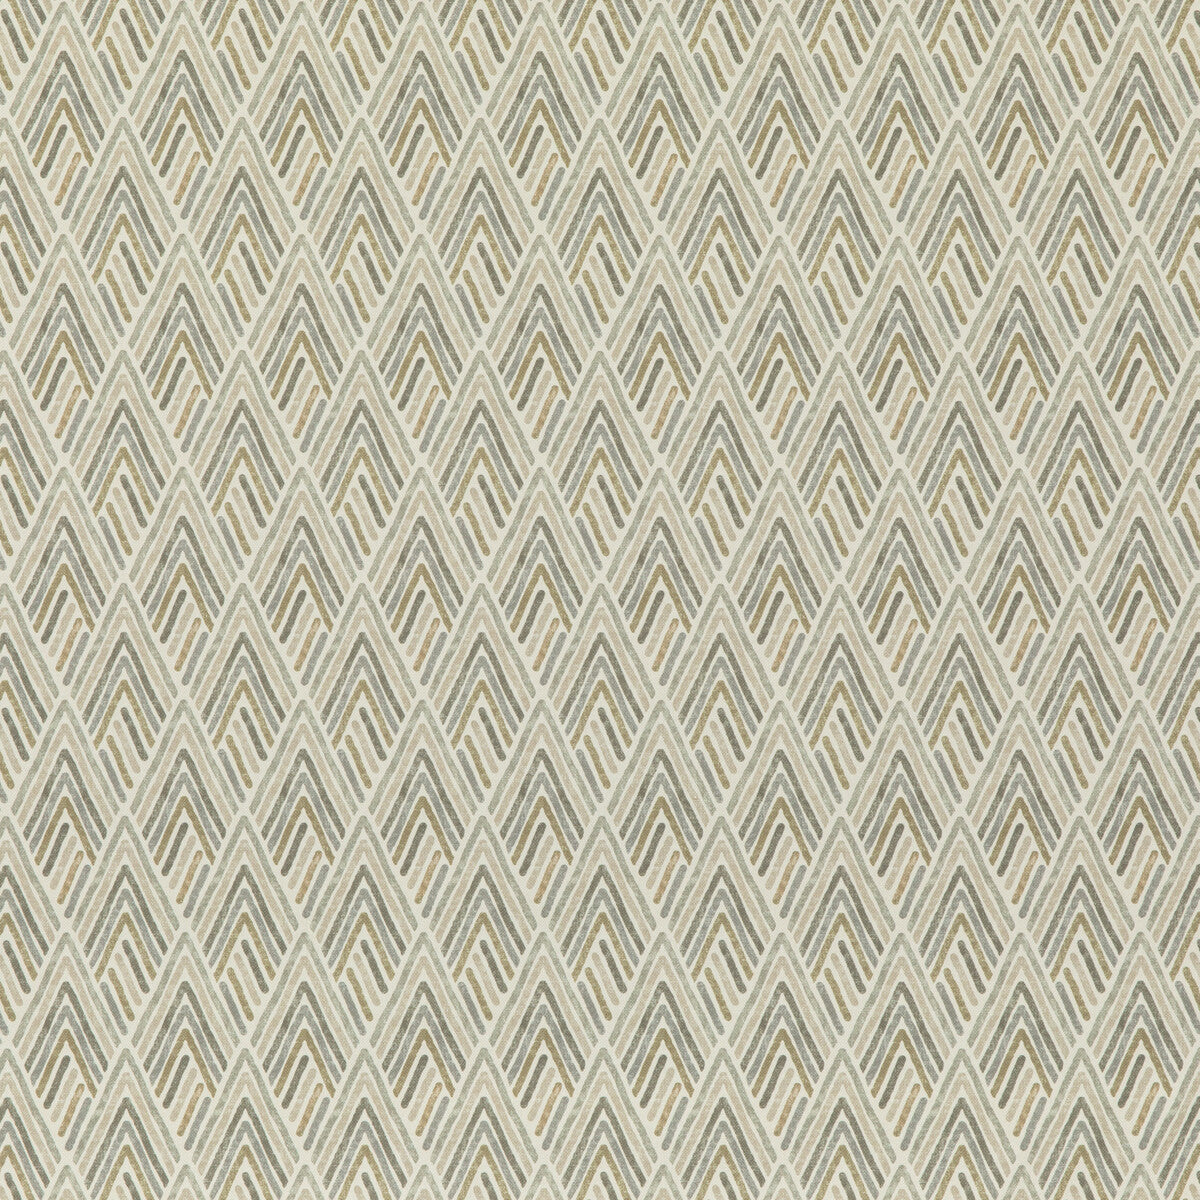 Vista fabric in linen color - pattern ED75041.3.0 - by Threads in the Nala Prints collection